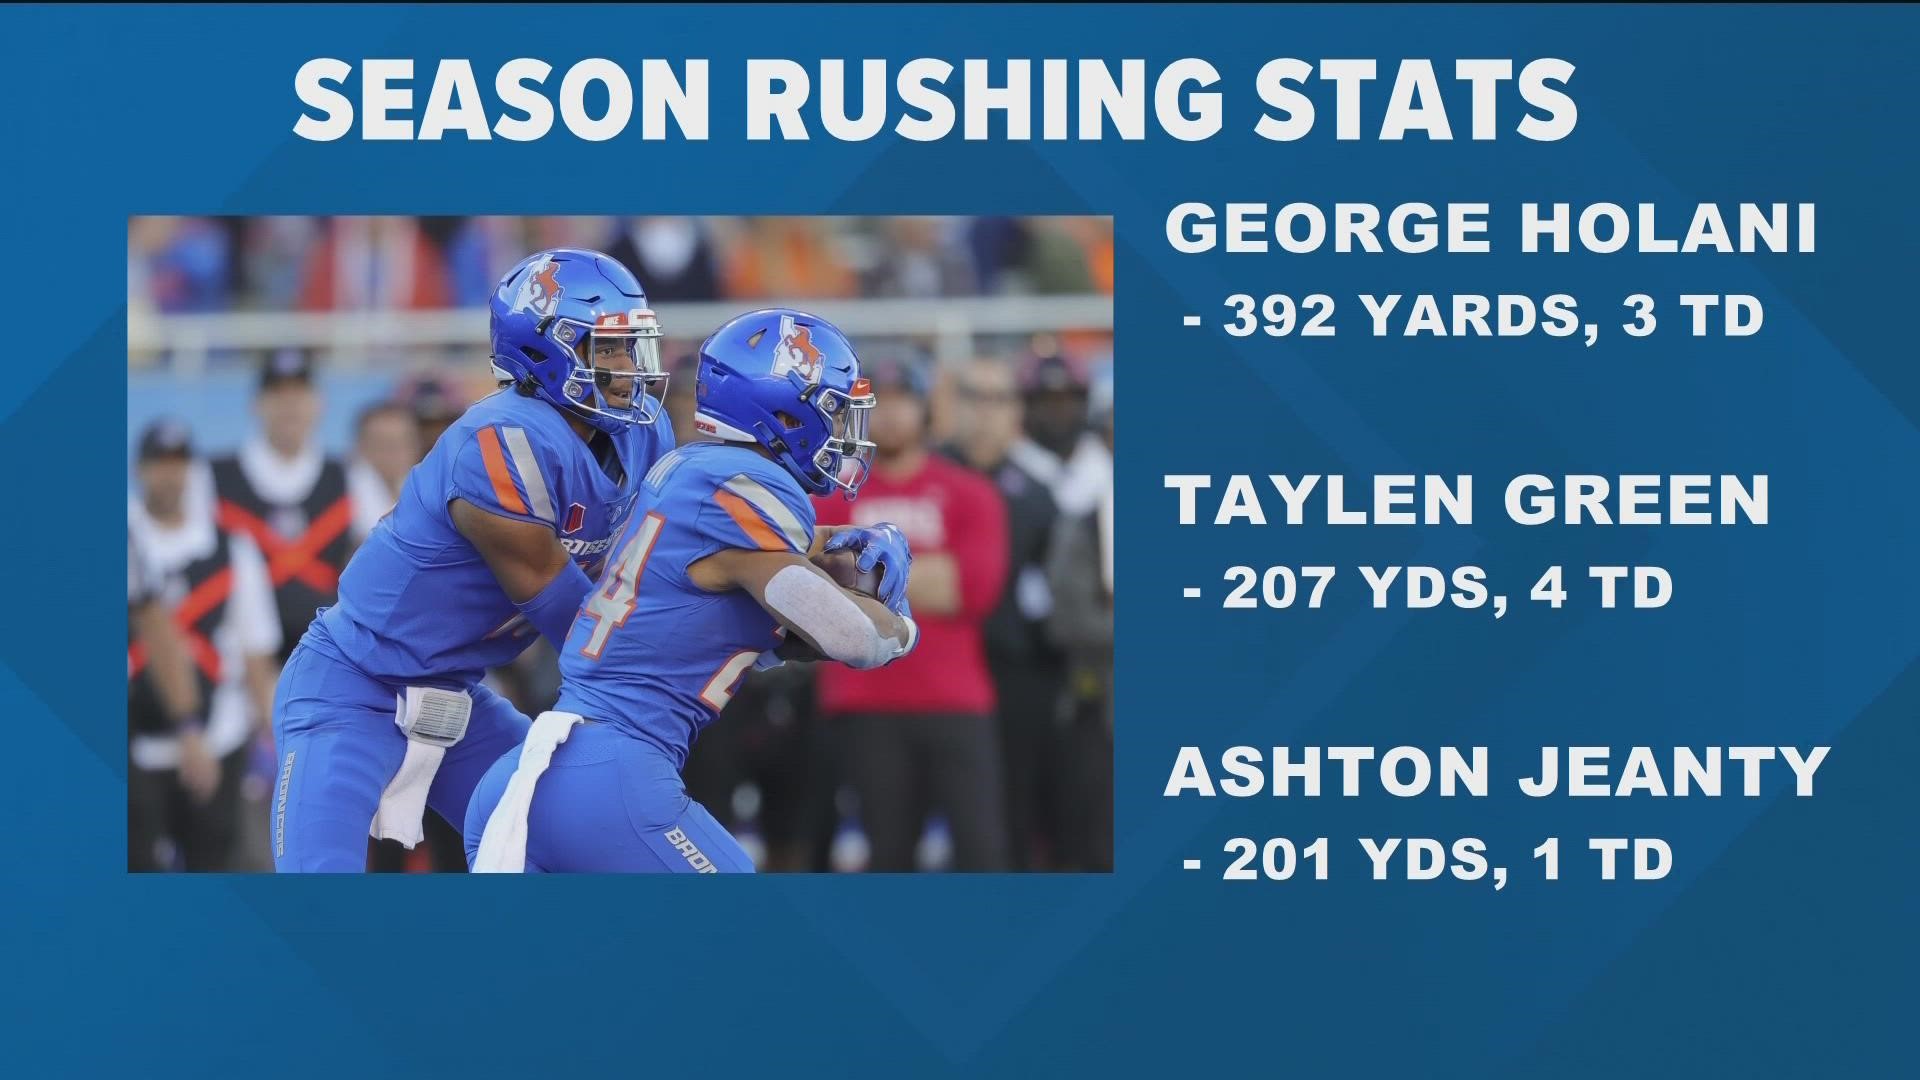 JL Skinner gave the nickname to the trio of Taylen Green, George Holani and Ashton Jeanty on Tuesday. The group rushed for 318 yards in the win over San Diego State.